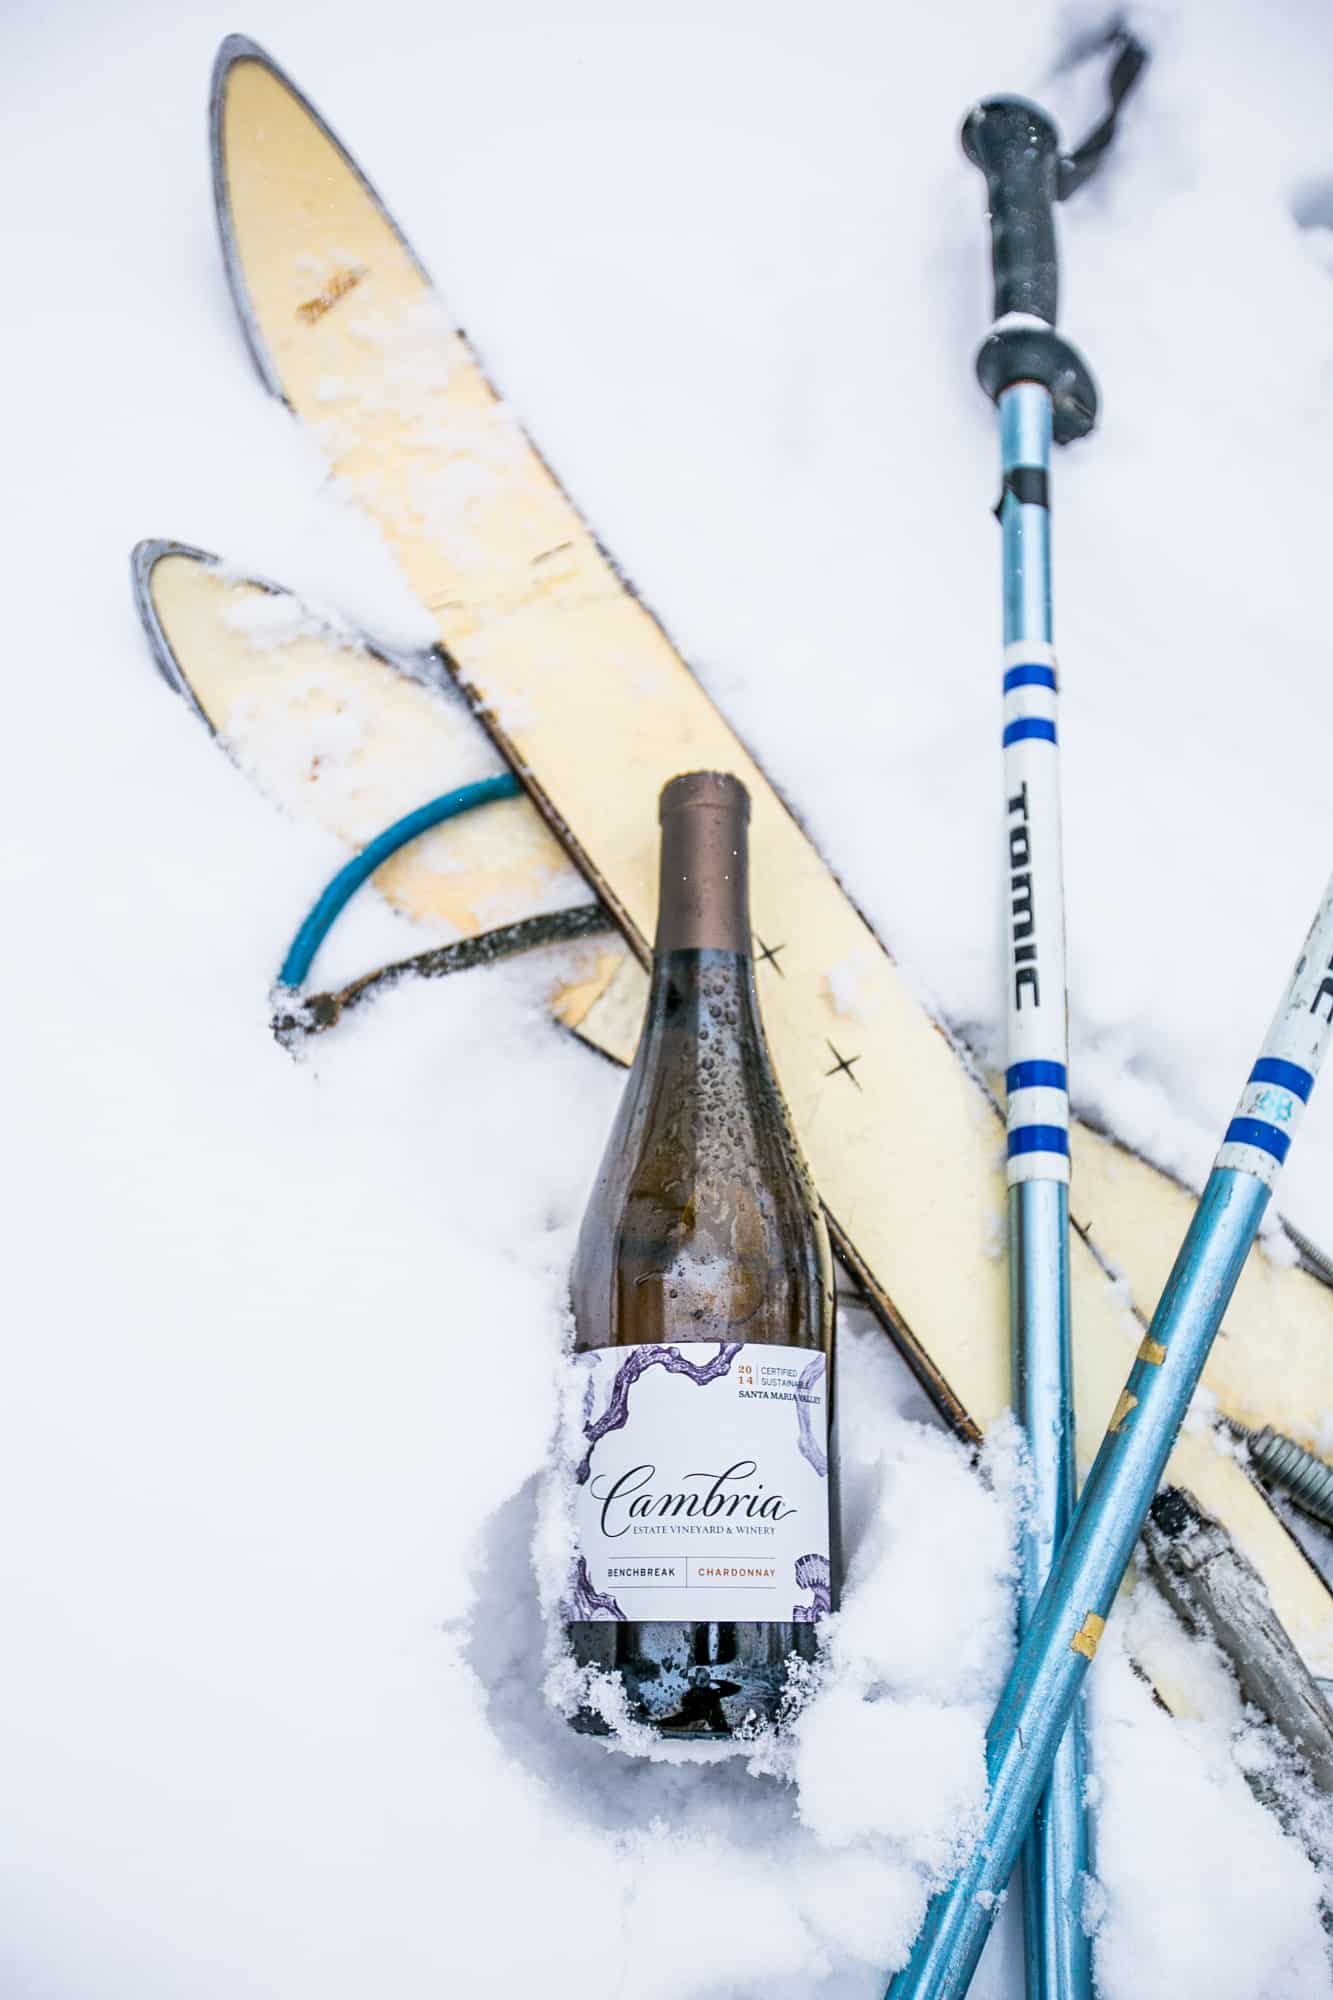 skis, ski poles, and Cambria wine in the snow